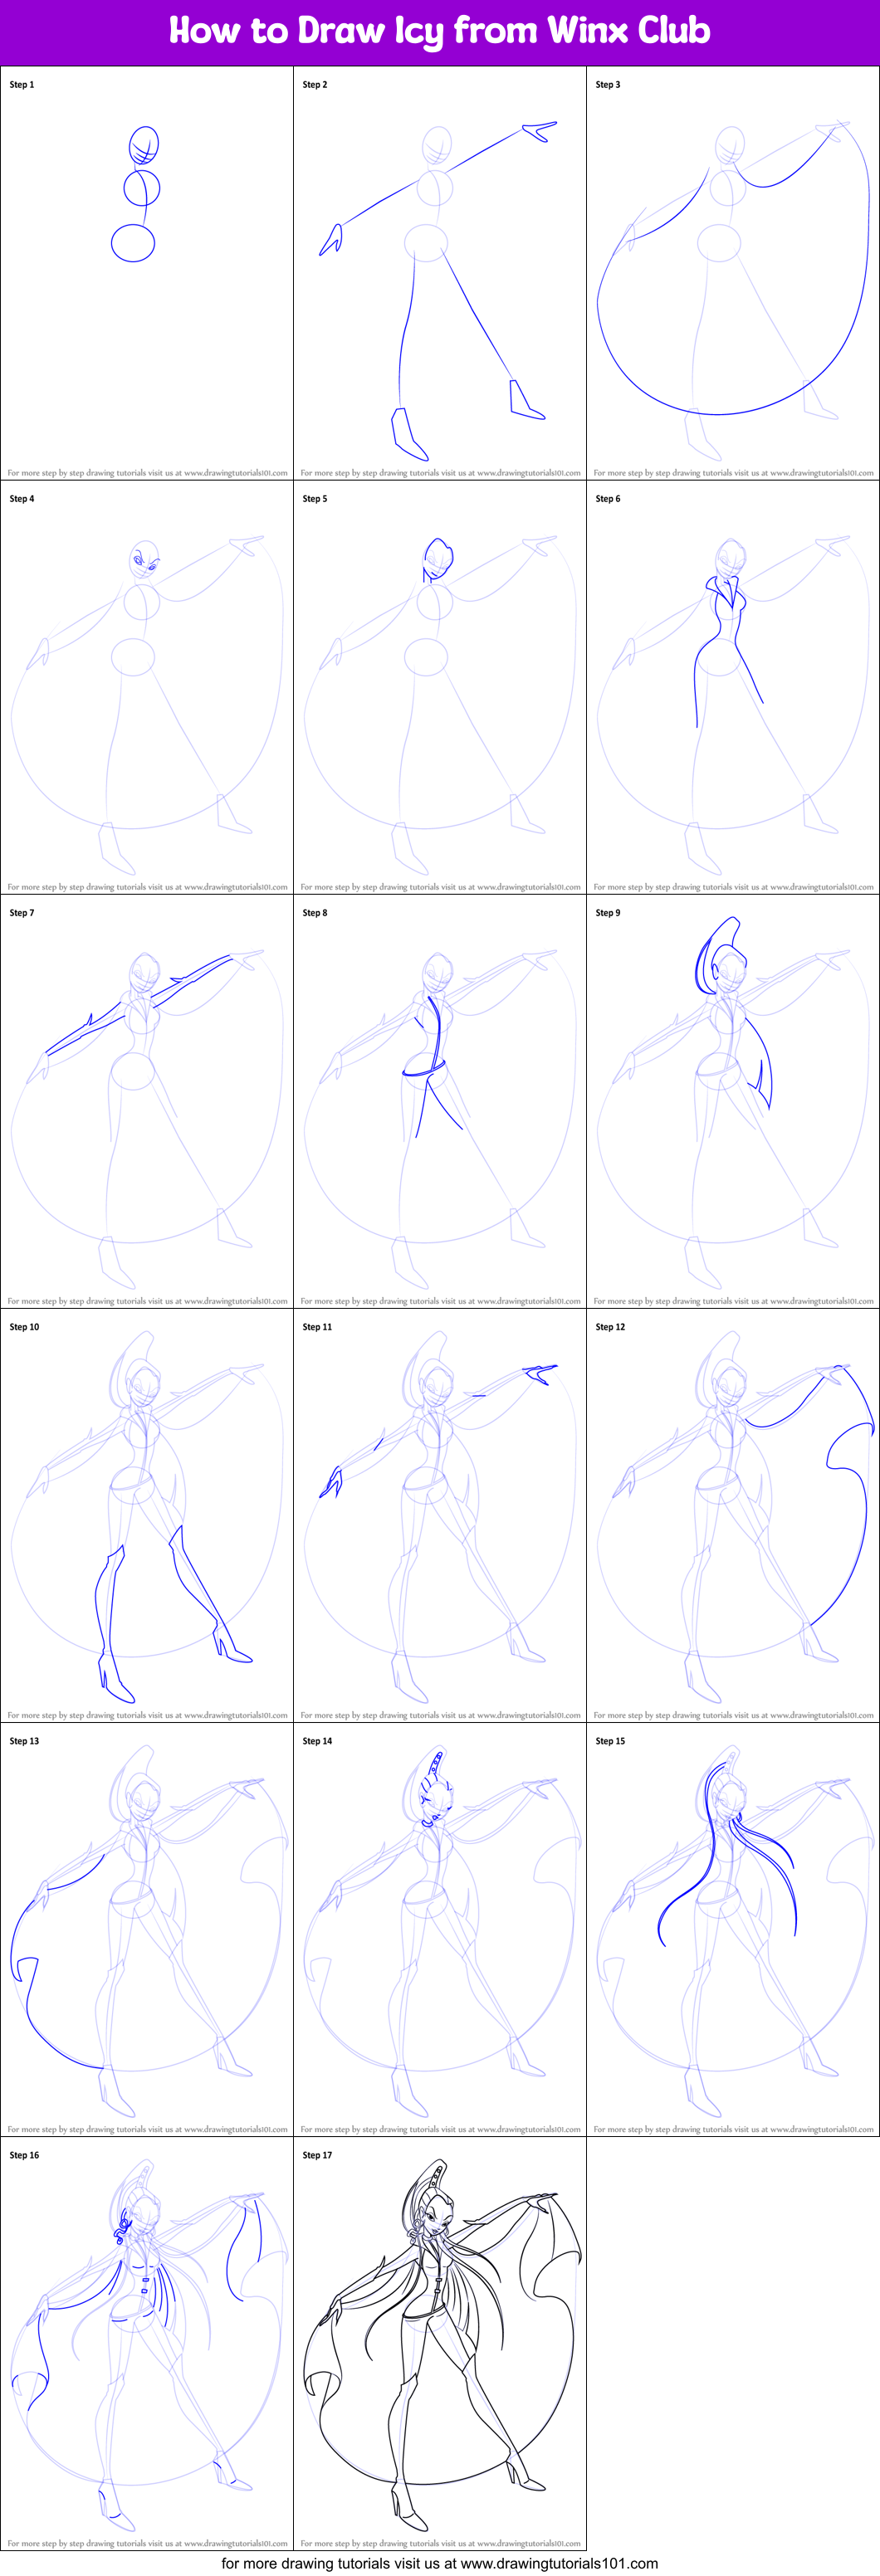 How to Draw Icy from Winx Club printable step by step drawing sheet